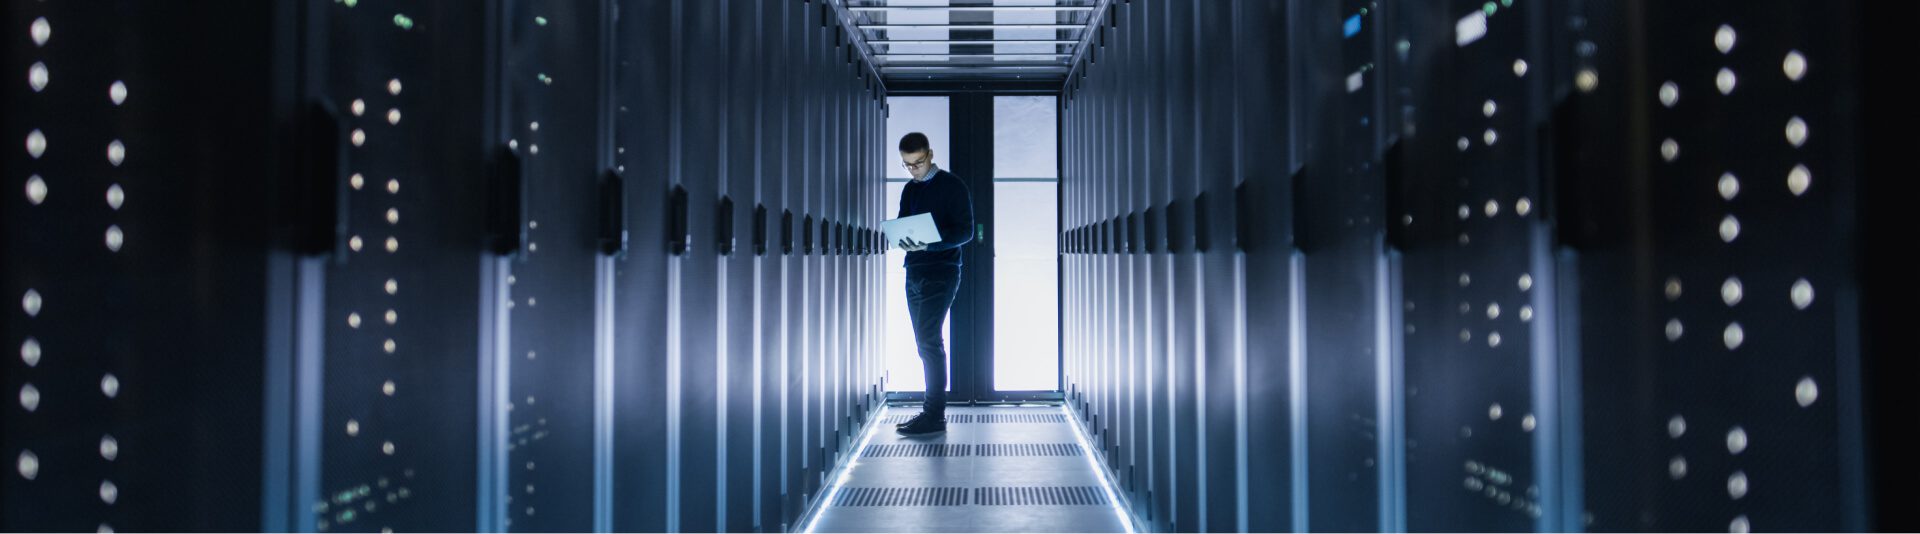 A person in a dark suit, a Dell partner, stands in a brightly lit data center, looking at servers.